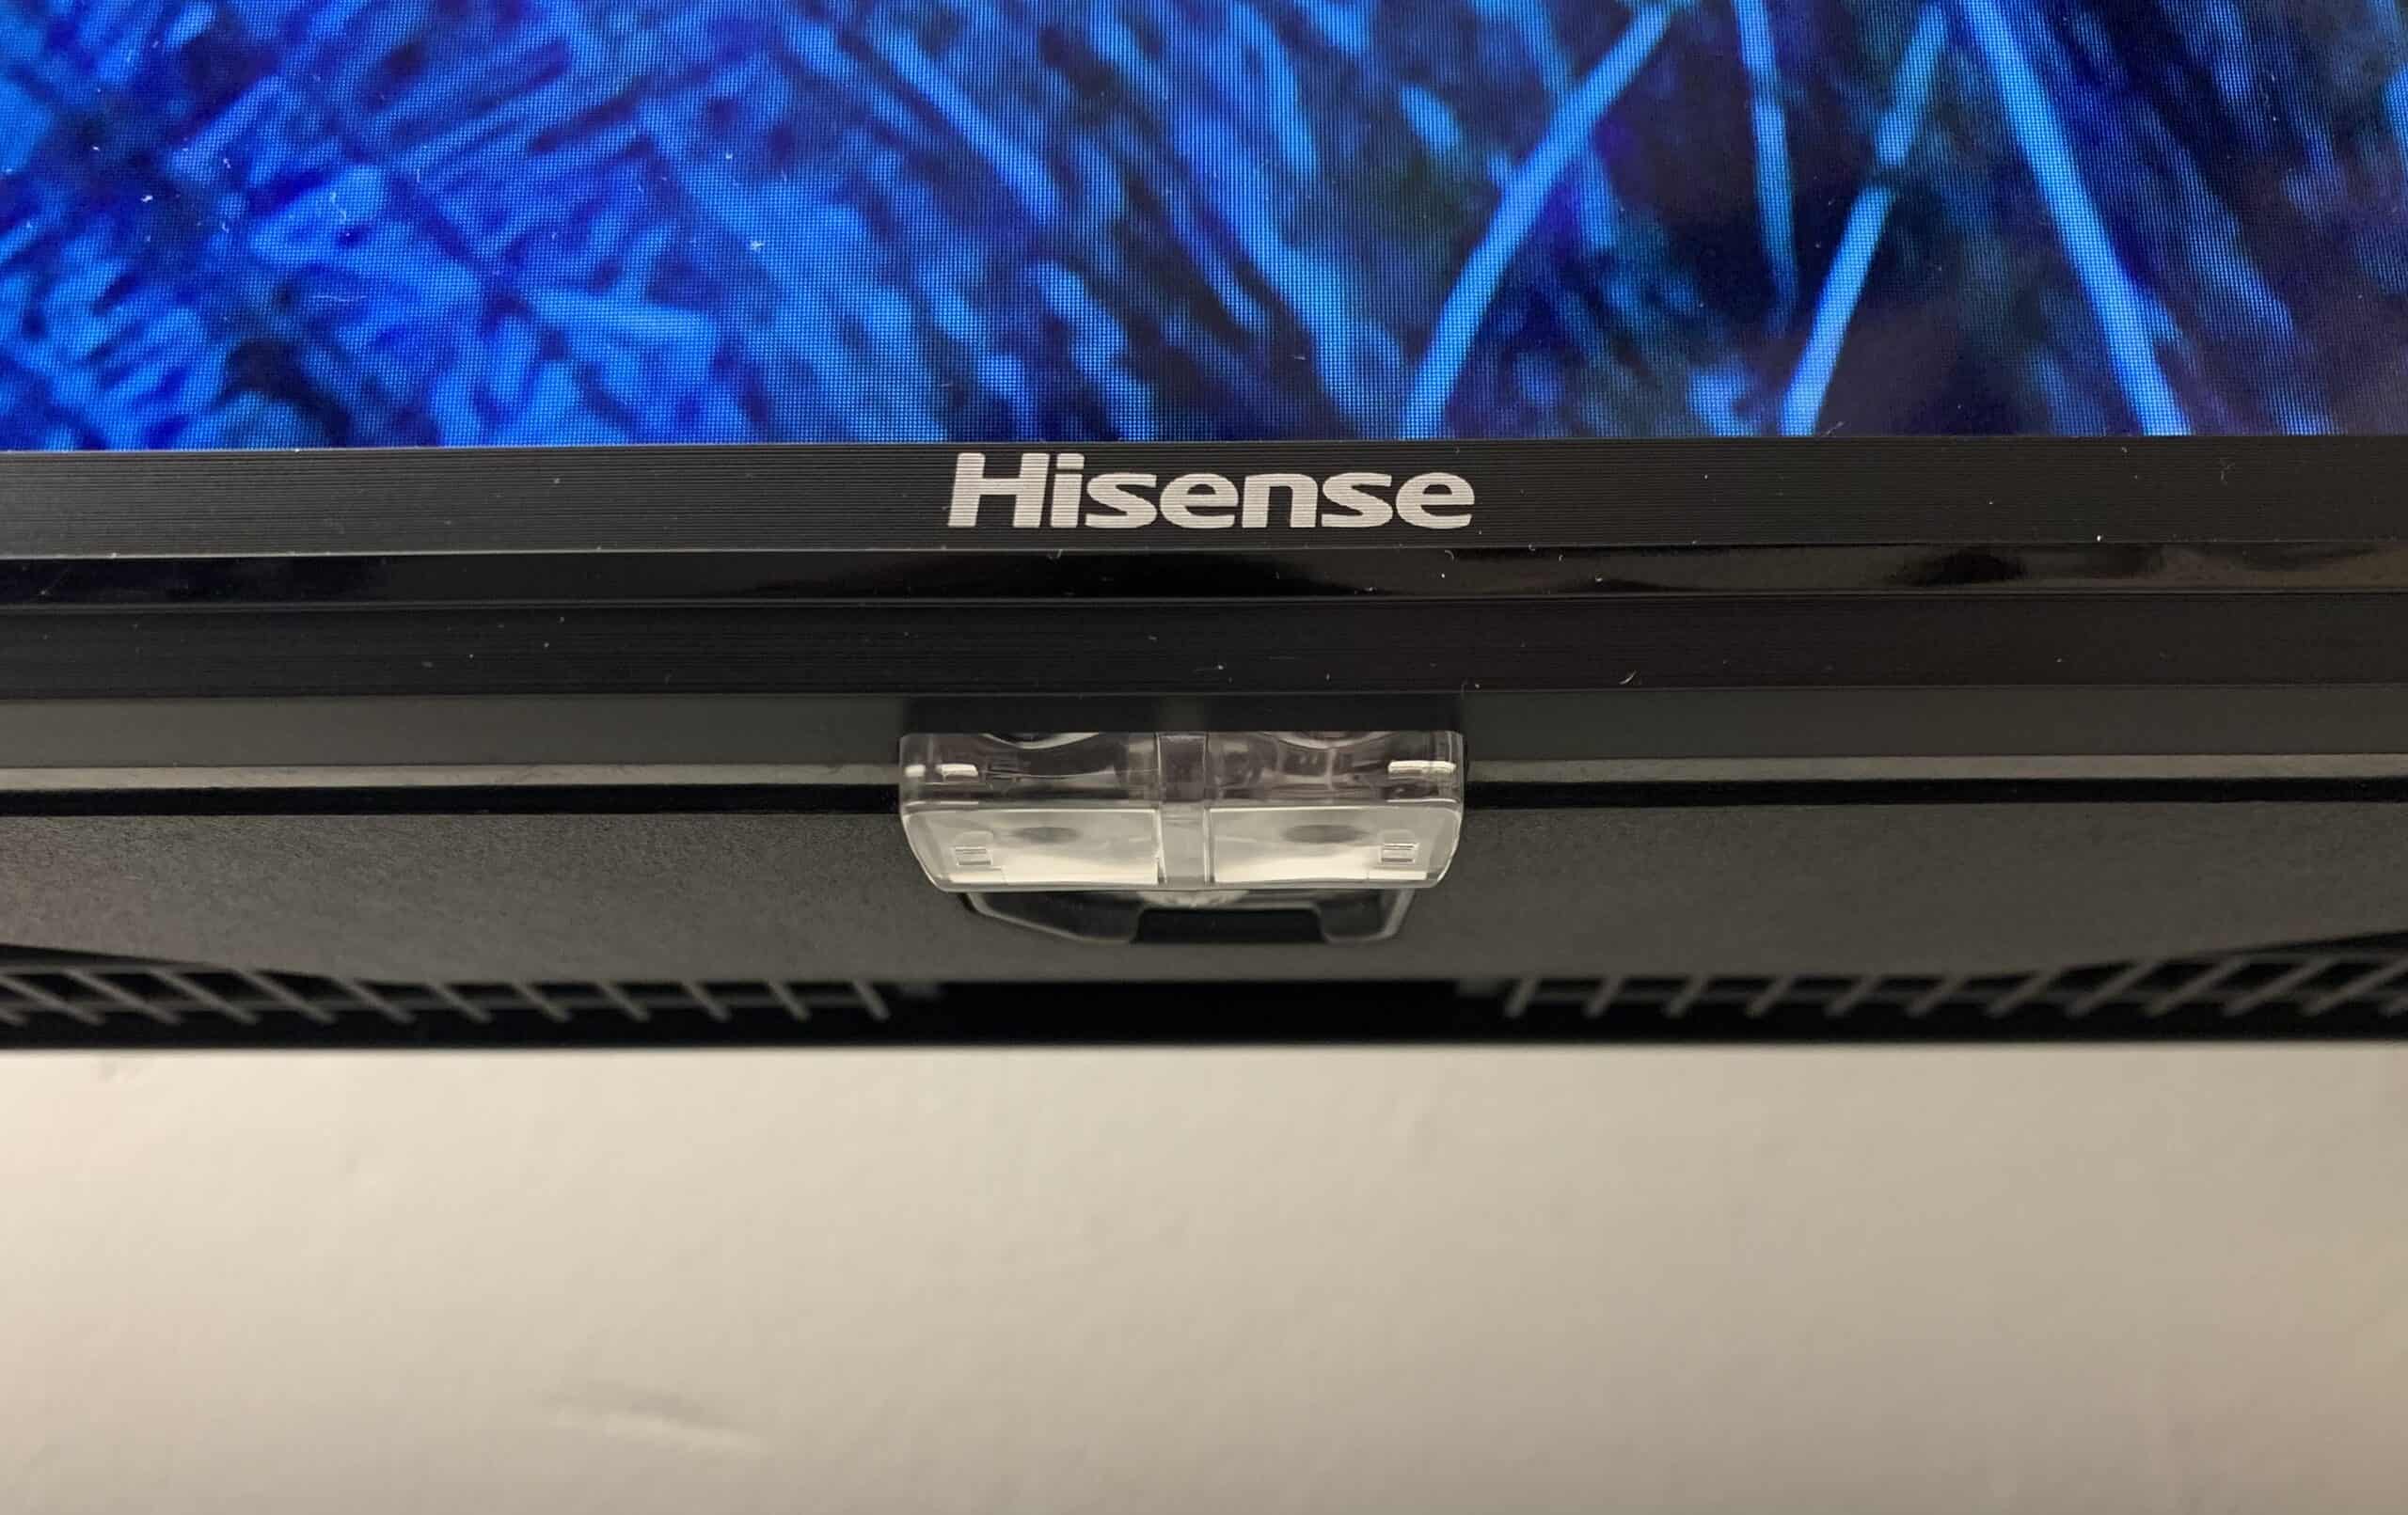 Bottom of Hisense TV screen with power button.